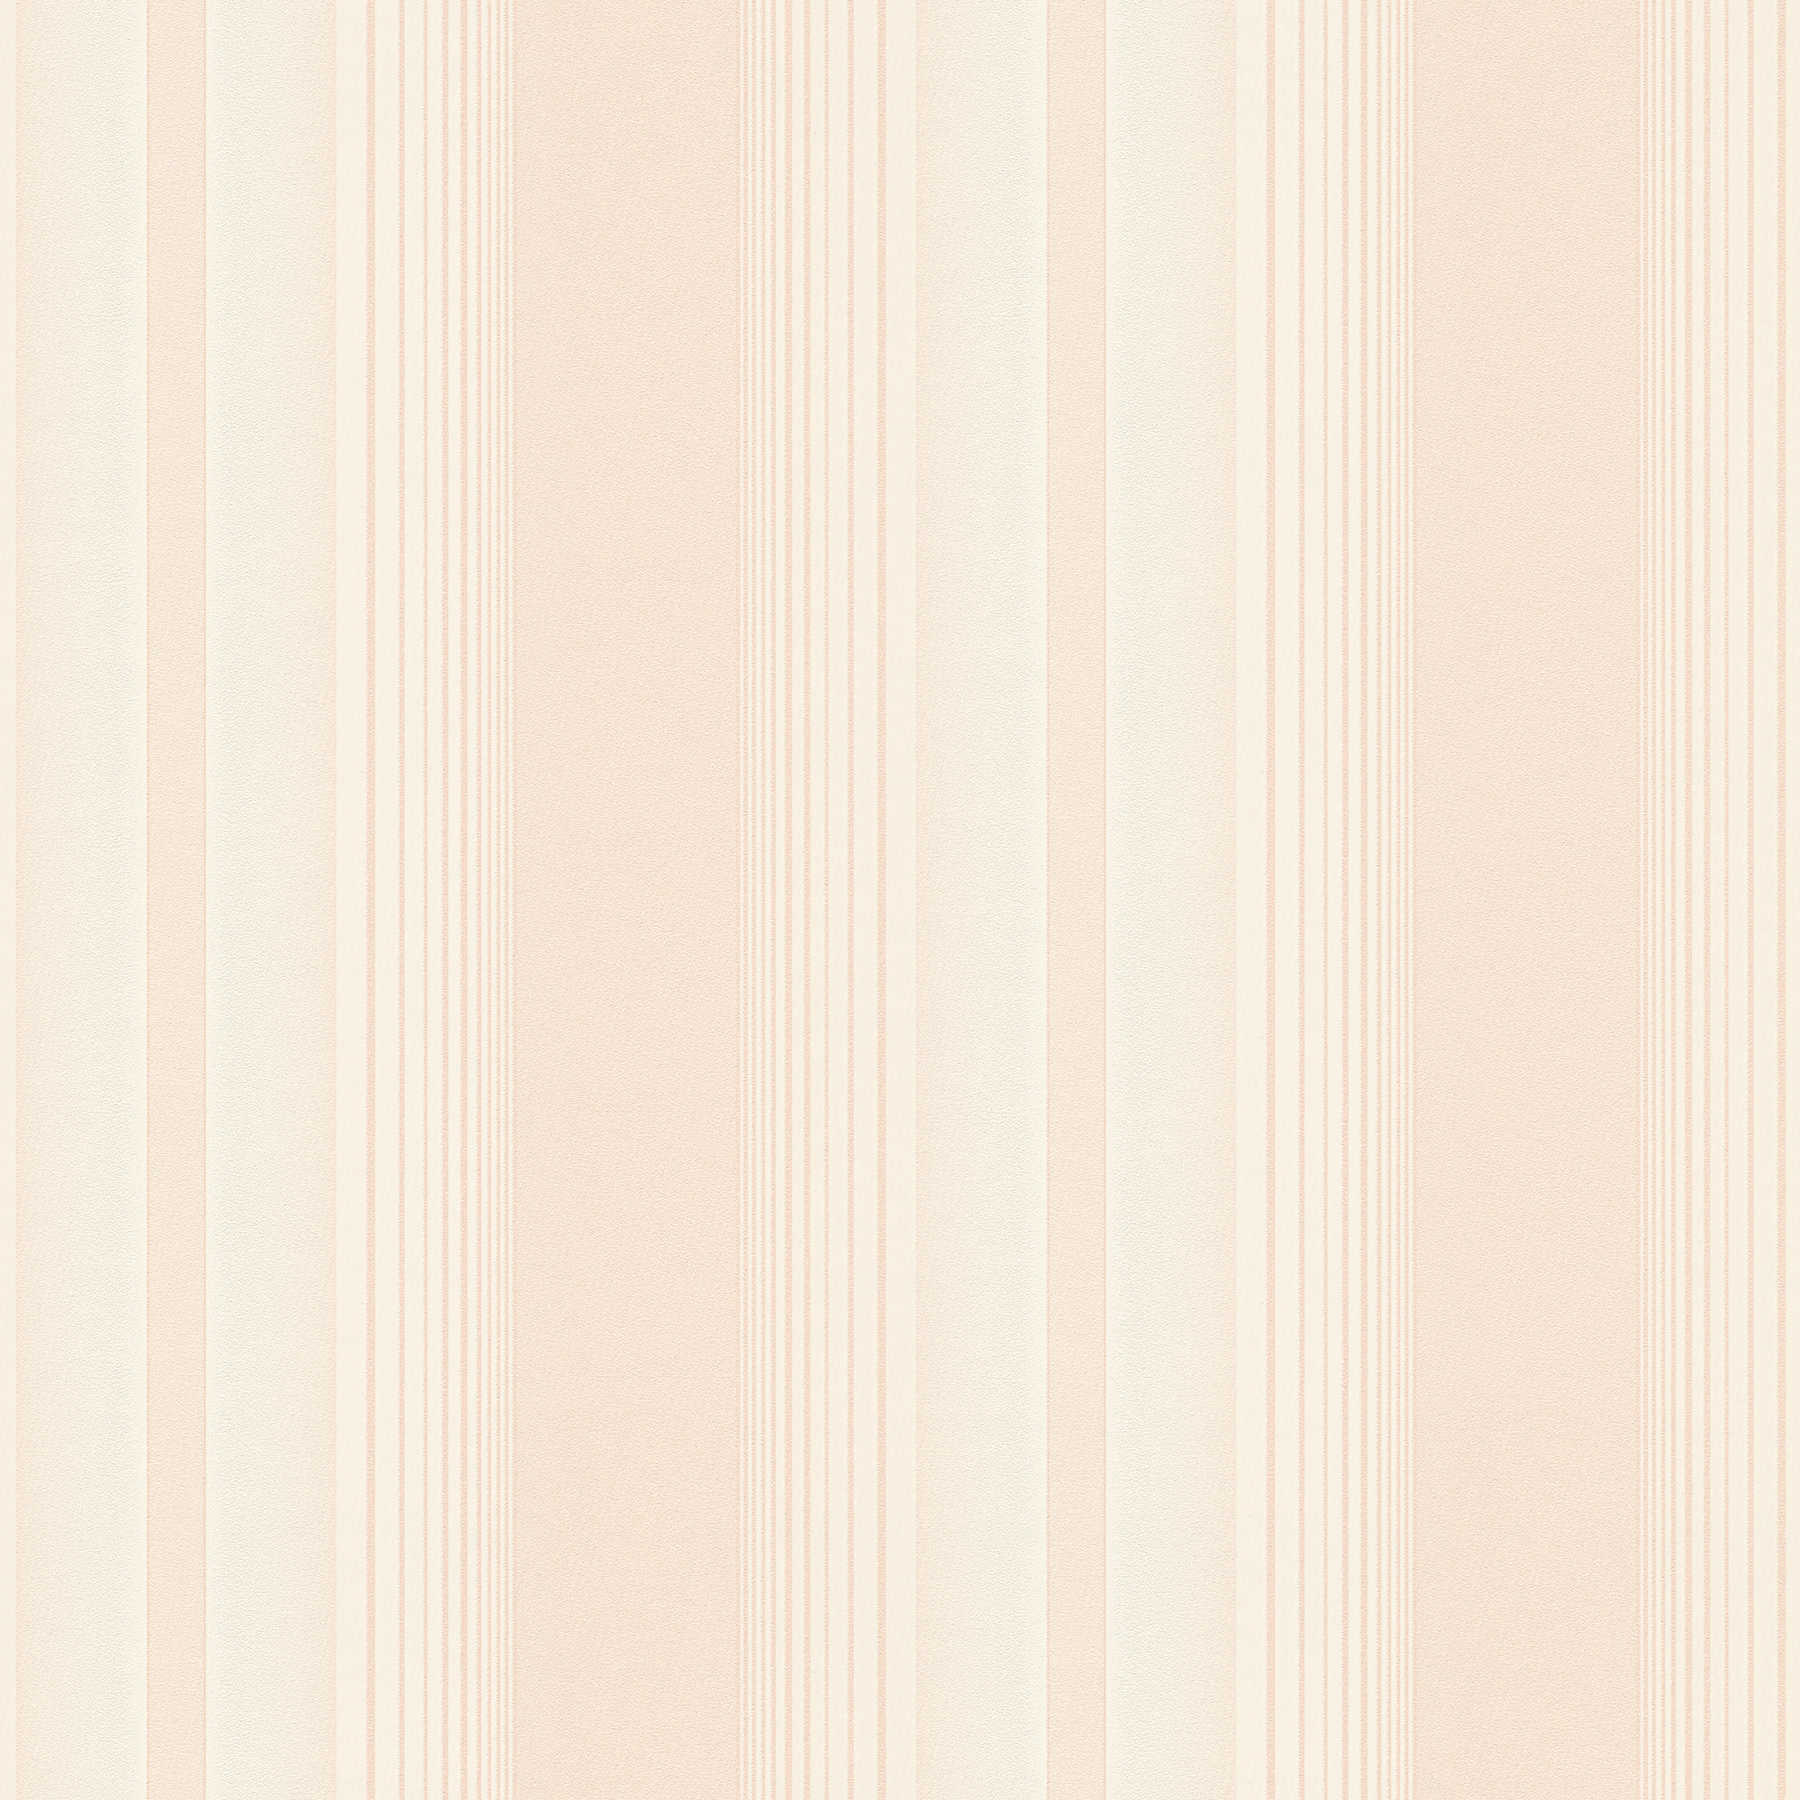 Stripes wallpaper with lined pattern - cream, pink
